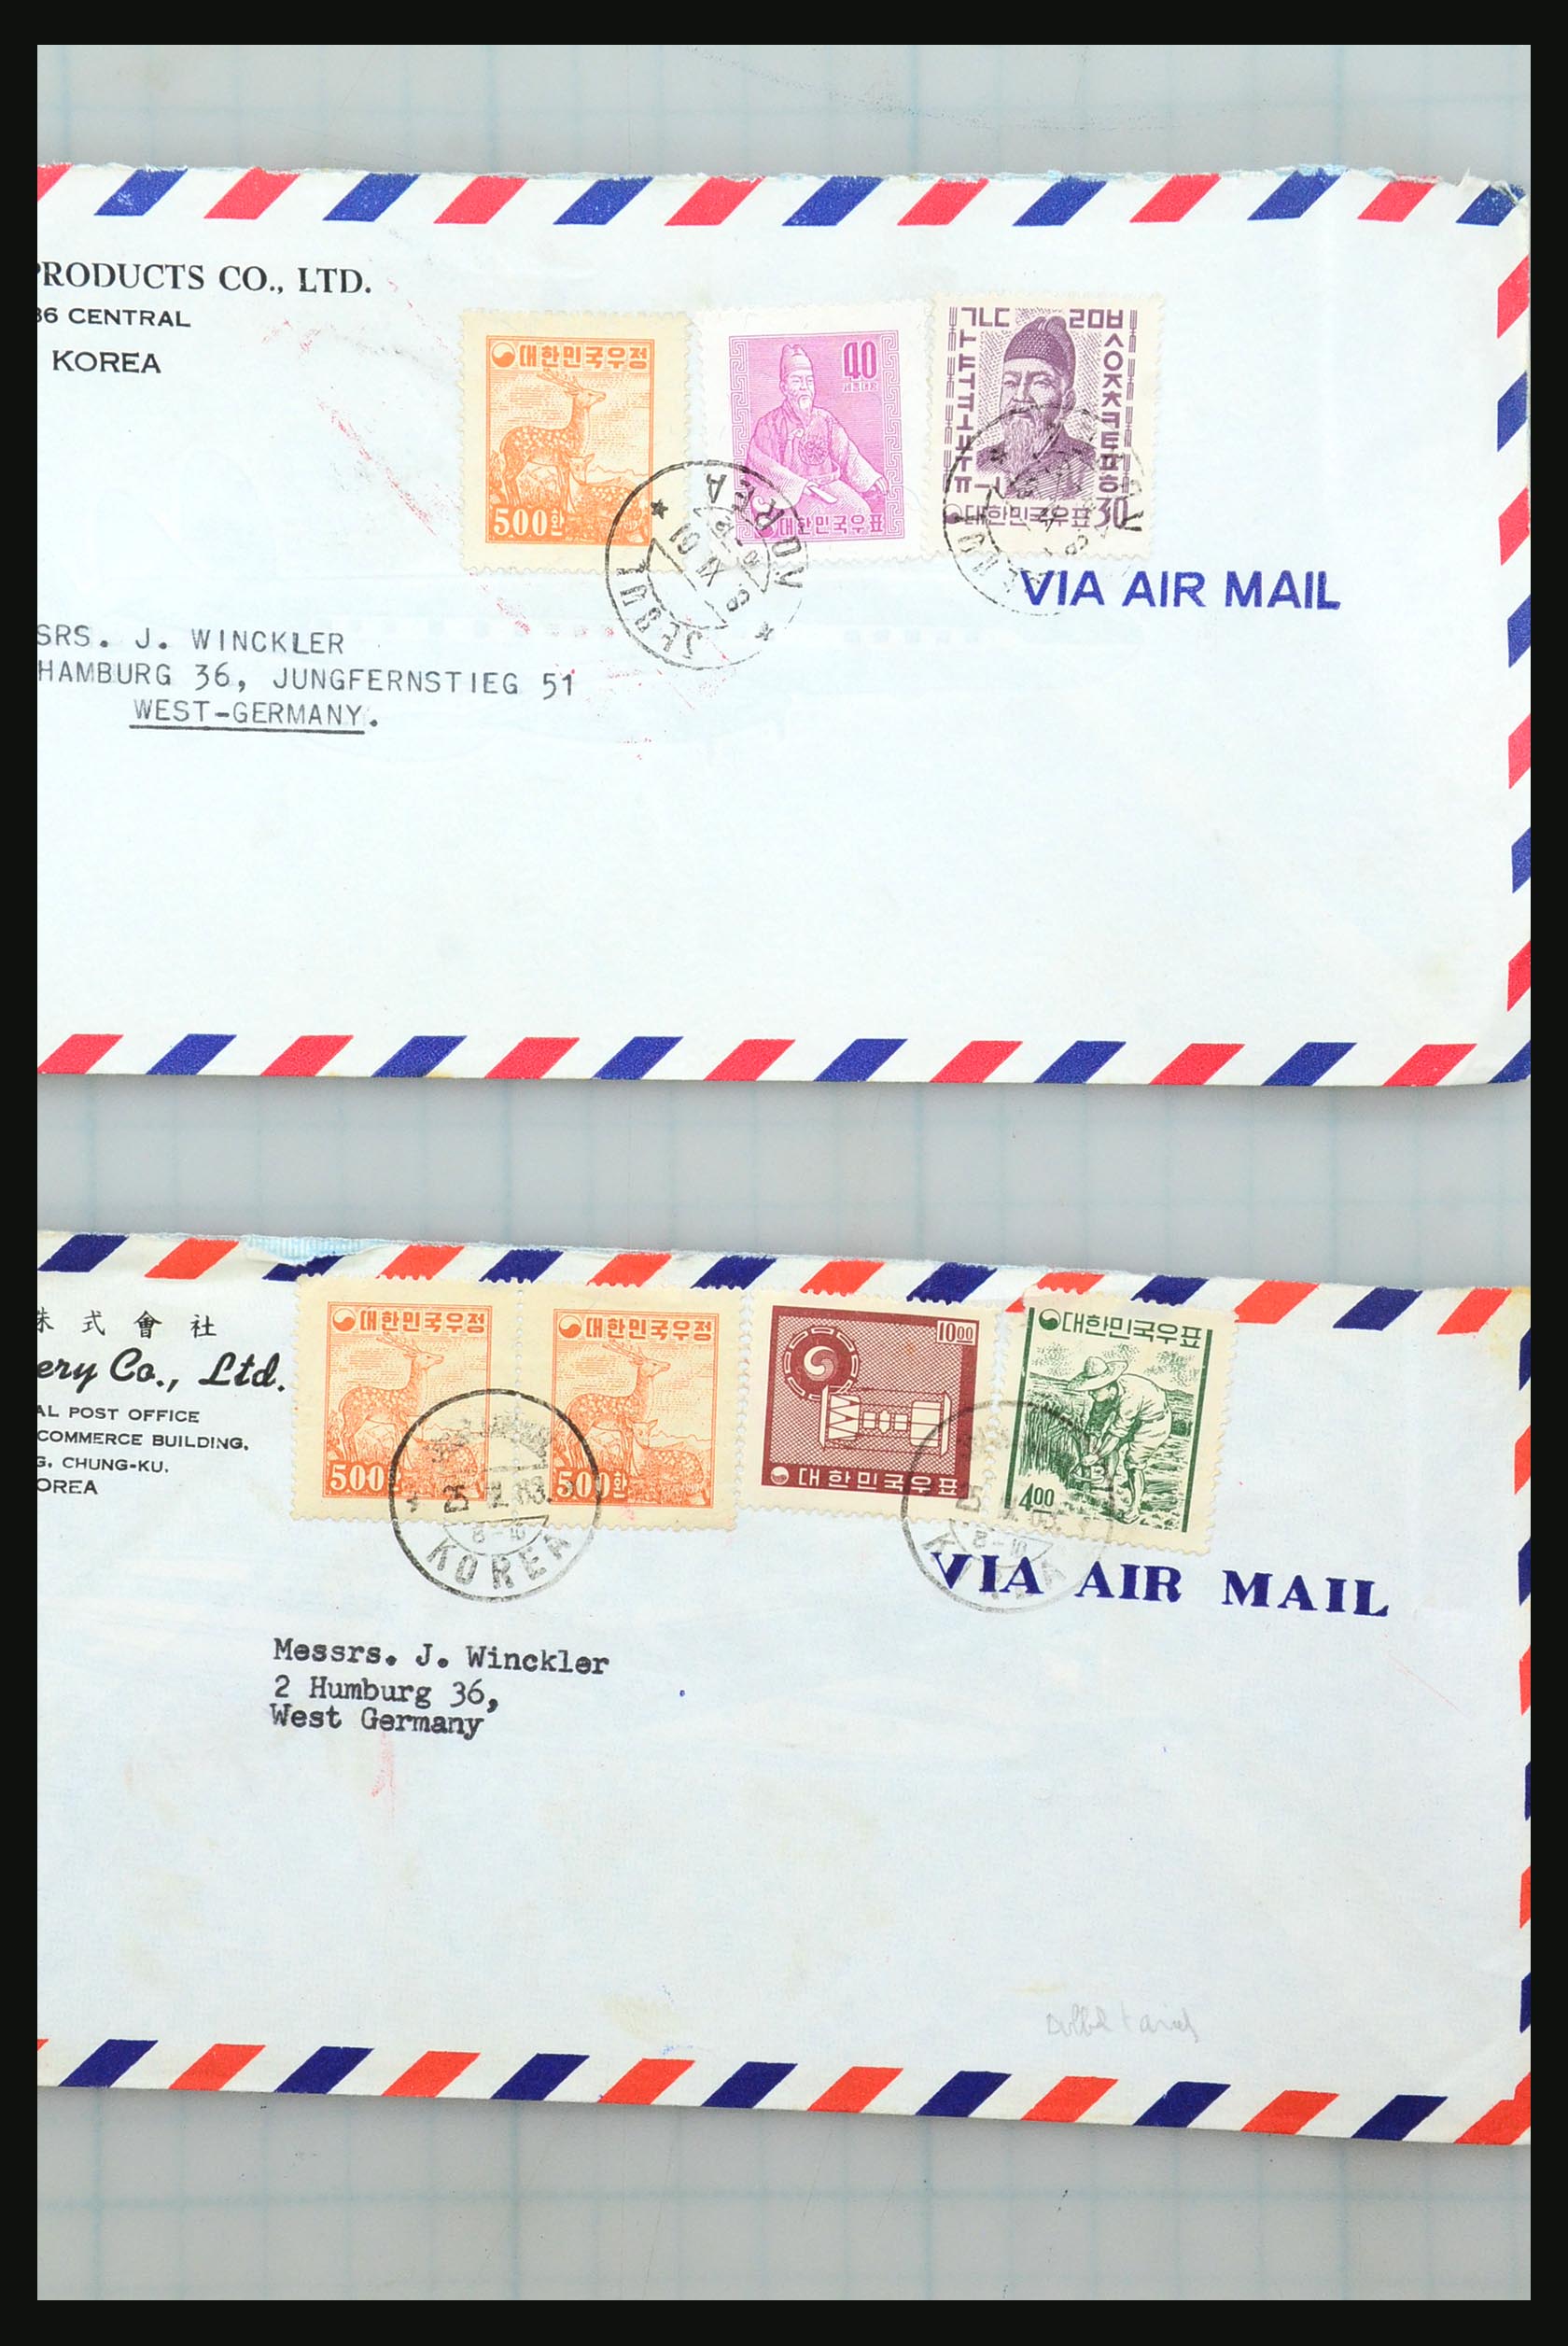 31355 098 - 31355 Asia covers 1900-1980.